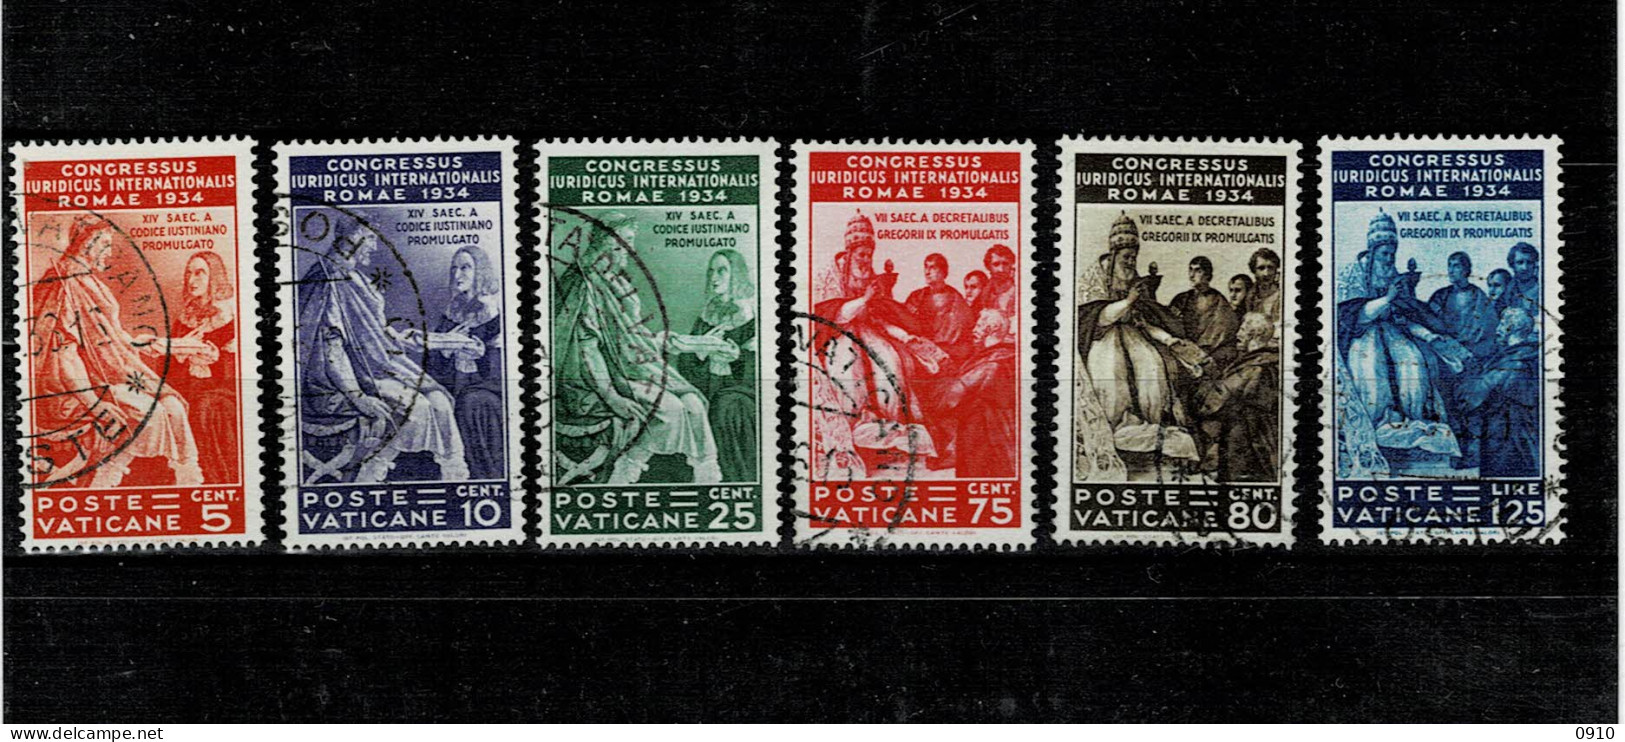 1935-CONGRES JURIDIQUE INTERNATIONAL A ROME-66/71-O - Used Stamps